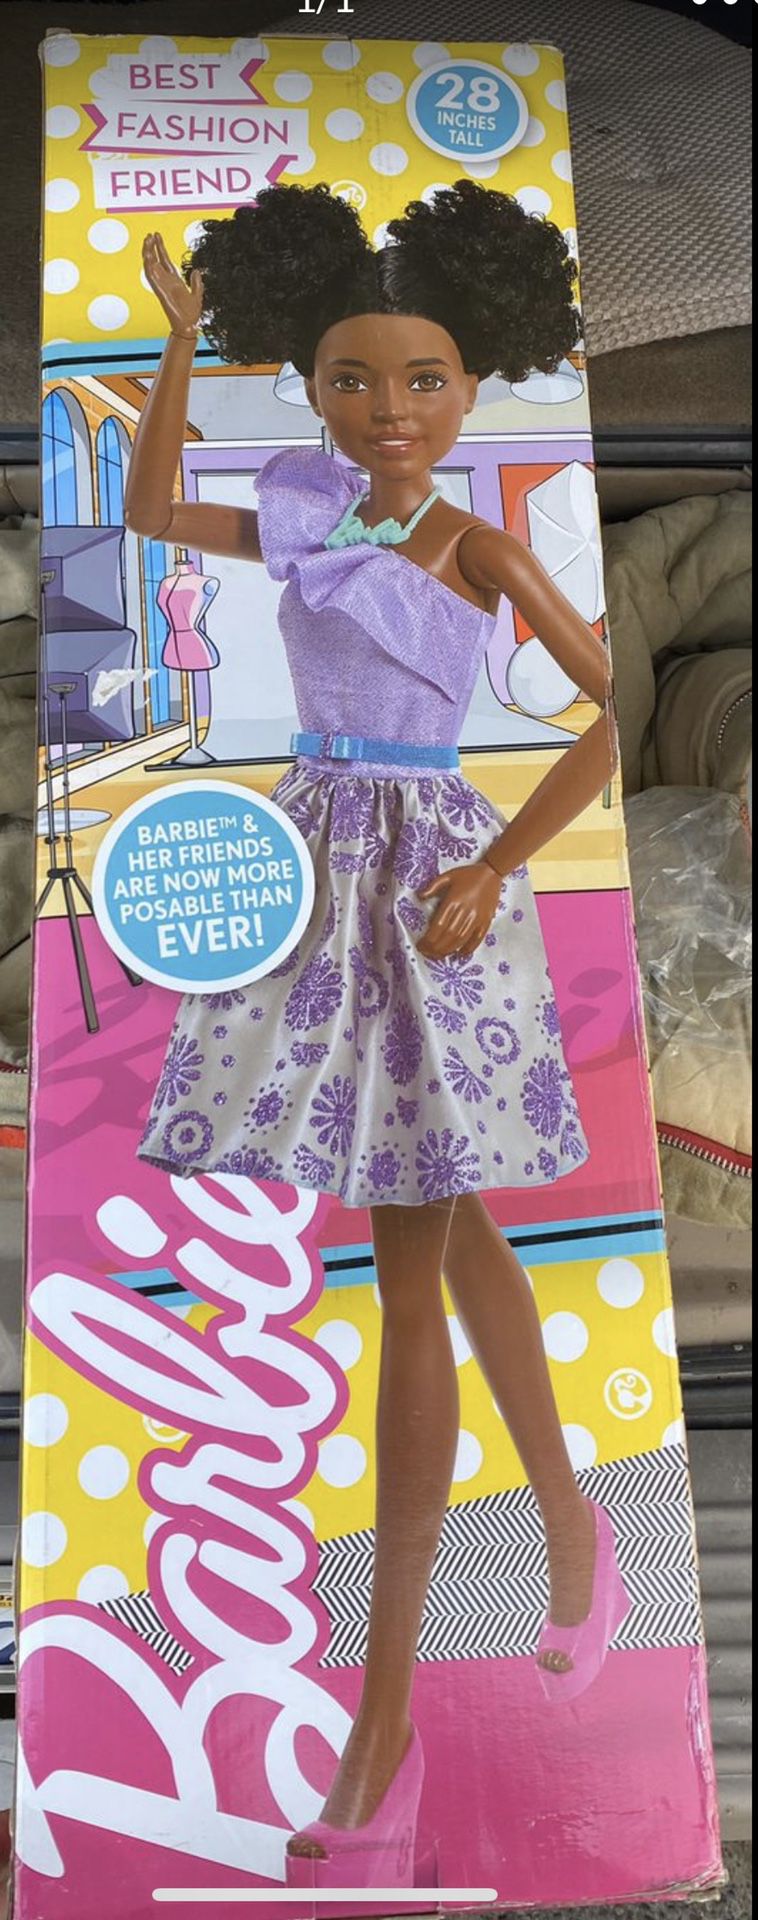 New 28 inches Barbie doll $50